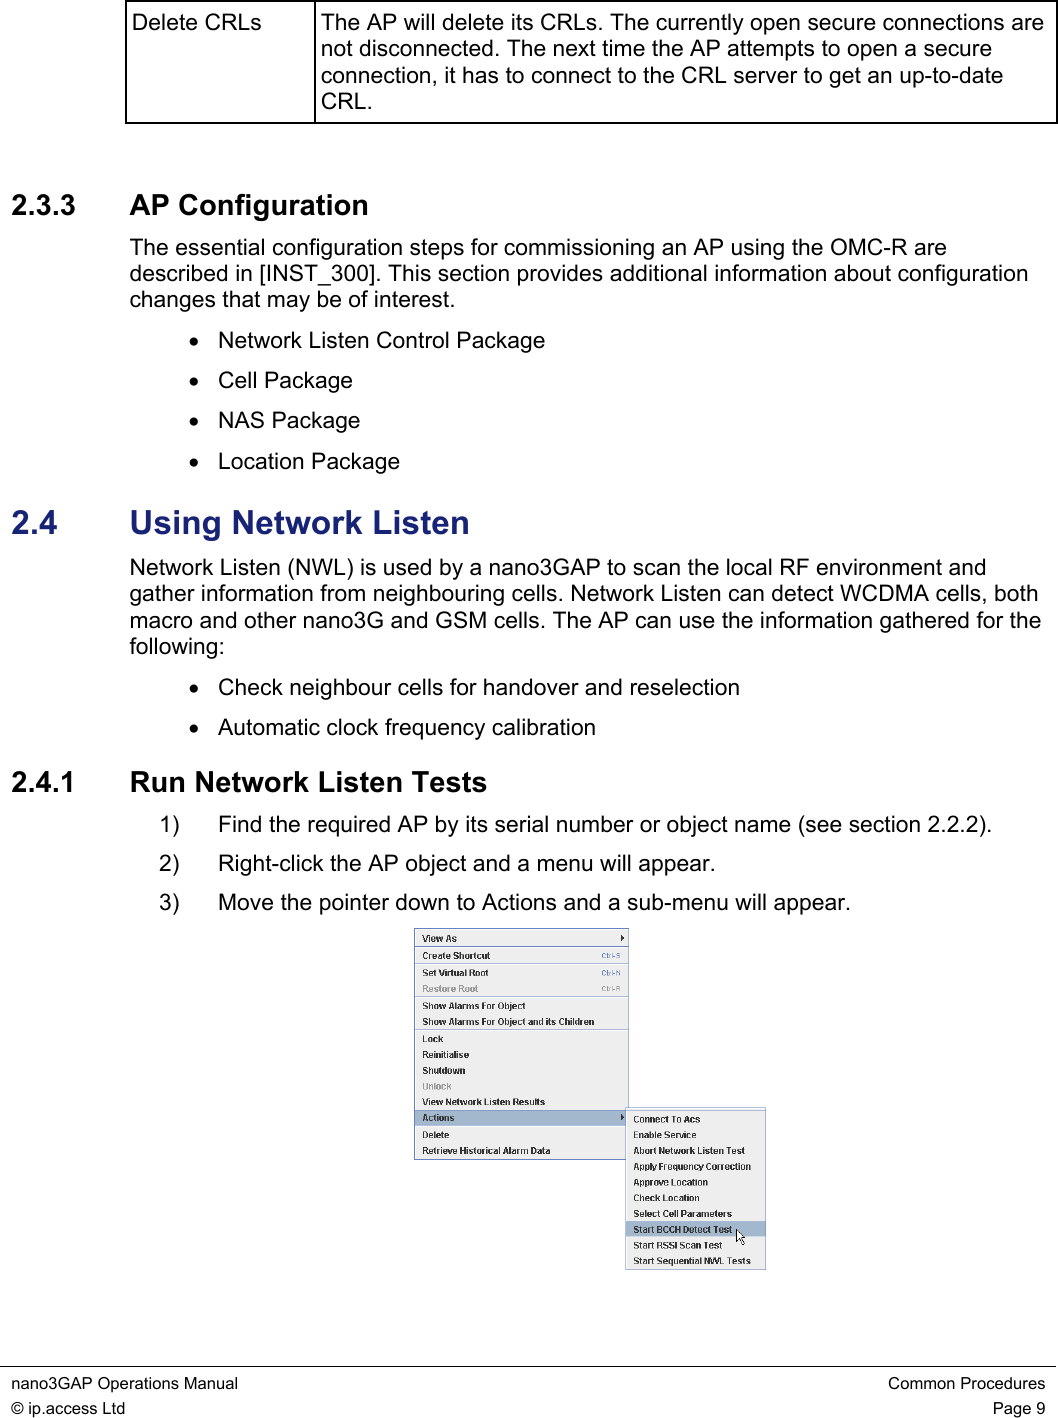 nano3GAP Operations Manual  Common Procedures © ip.access Ltd  Page 9  Delete CRLs   The AP will delete its CRLs. The currently open secure connections are not disconnected. The next time the AP attempts to open a secure connection, it has to connect to the CRL server to get an up-to-date CRL.  2.3.3  AP Configuration The essential configuration steps for commissioning an AP using the OMC-R are described in [INST_300]. This section provides additional information about configuration changes that may be of interest. •  Network Listen Control Package • Cell Package • NAS Package • Location Package 2.4  Using Network Listen Network Listen (NWL) is used by a nano3GAP to scan the local RF environment and gather information from neighbouring cells. Network Listen can detect WCDMA cells, both macro and other nano3G and GSM cells. The AP can use the information gathered for the following: •  Check neighbour cells for handover and reselection •  Automatic clock frequency calibration 2.4.1  Run Network Listen Tests 1)  Find the required AP by its serial number or object name (see section 2.2.2). 2)  Right-click the AP object and a menu will appear. 3)  Move the pointer down to Actions and a sub-menu will appear.  